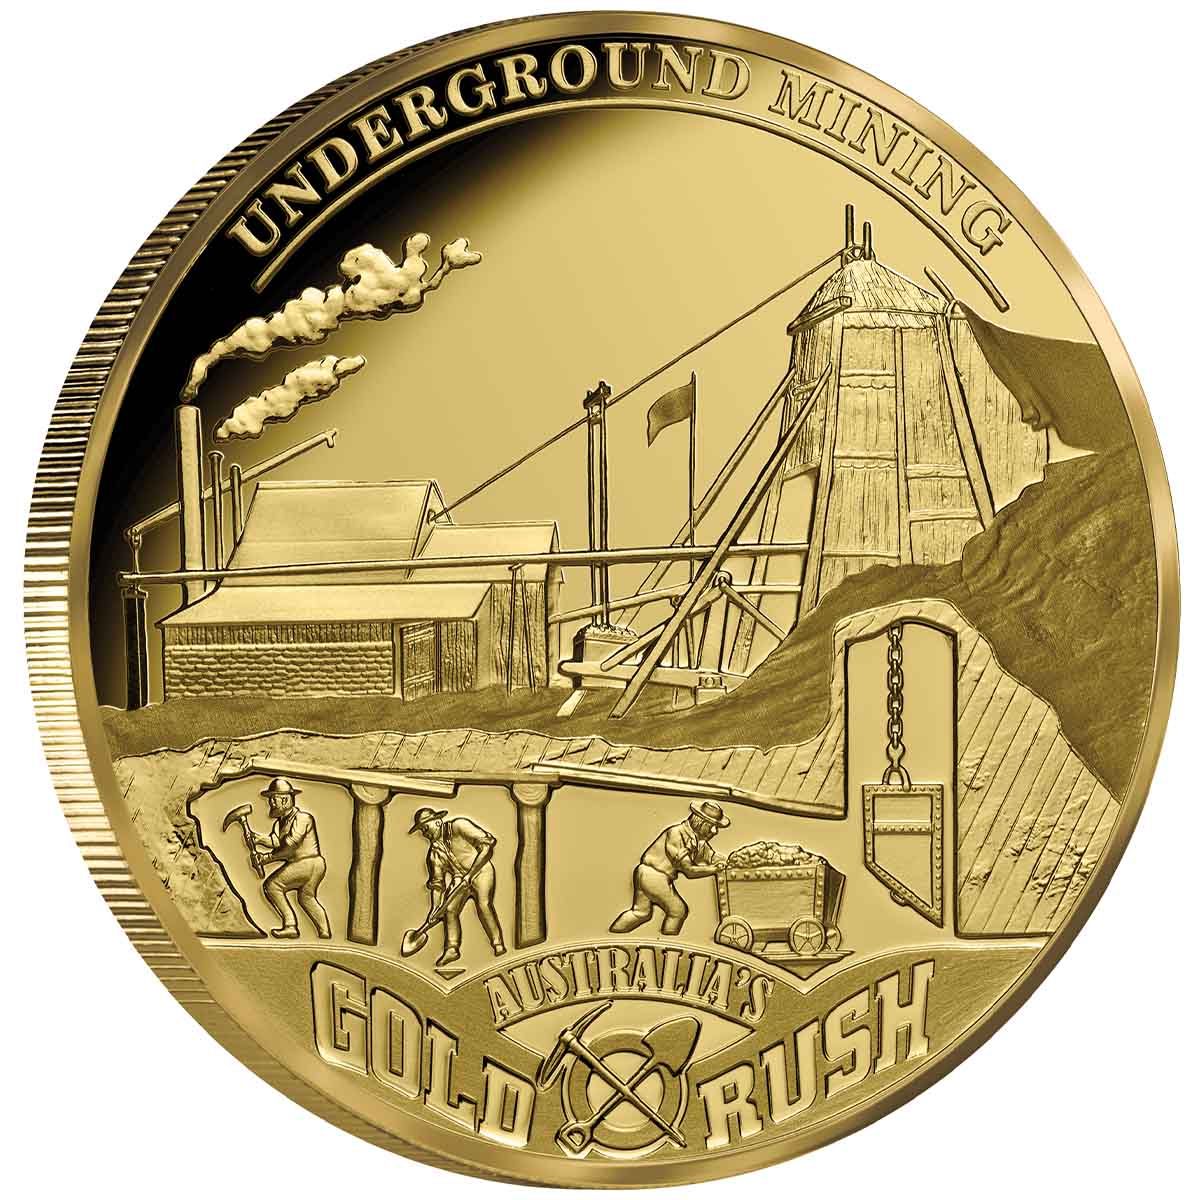 Gold Rush 2018 $1 Underground Mining Gold-plated Proof Coin